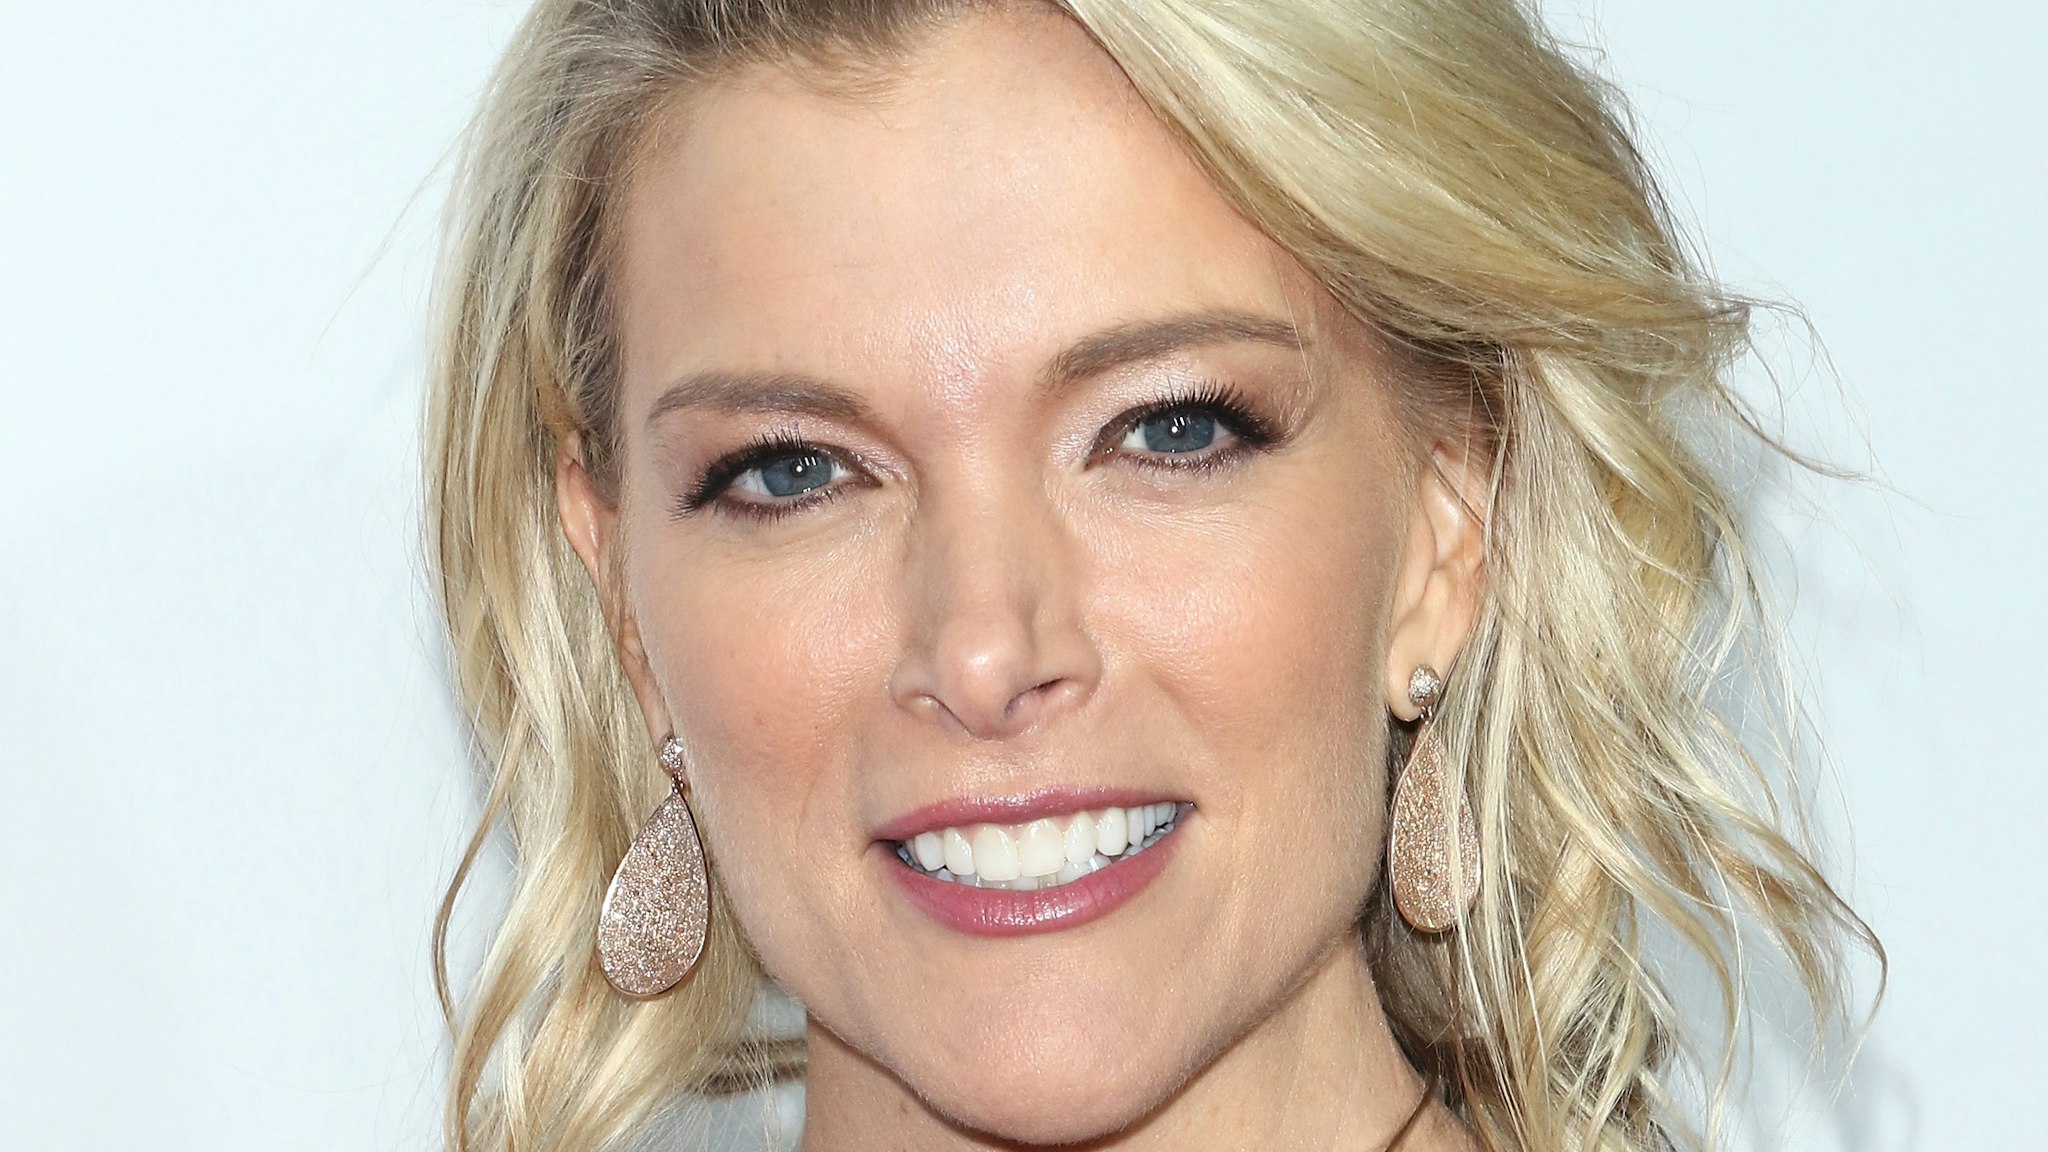 Journalist Megyn Kelly attends the 11th Annual Stand Up for Heroes at The Theater at Madison Square Garden on November 7, 2017 in New York City.